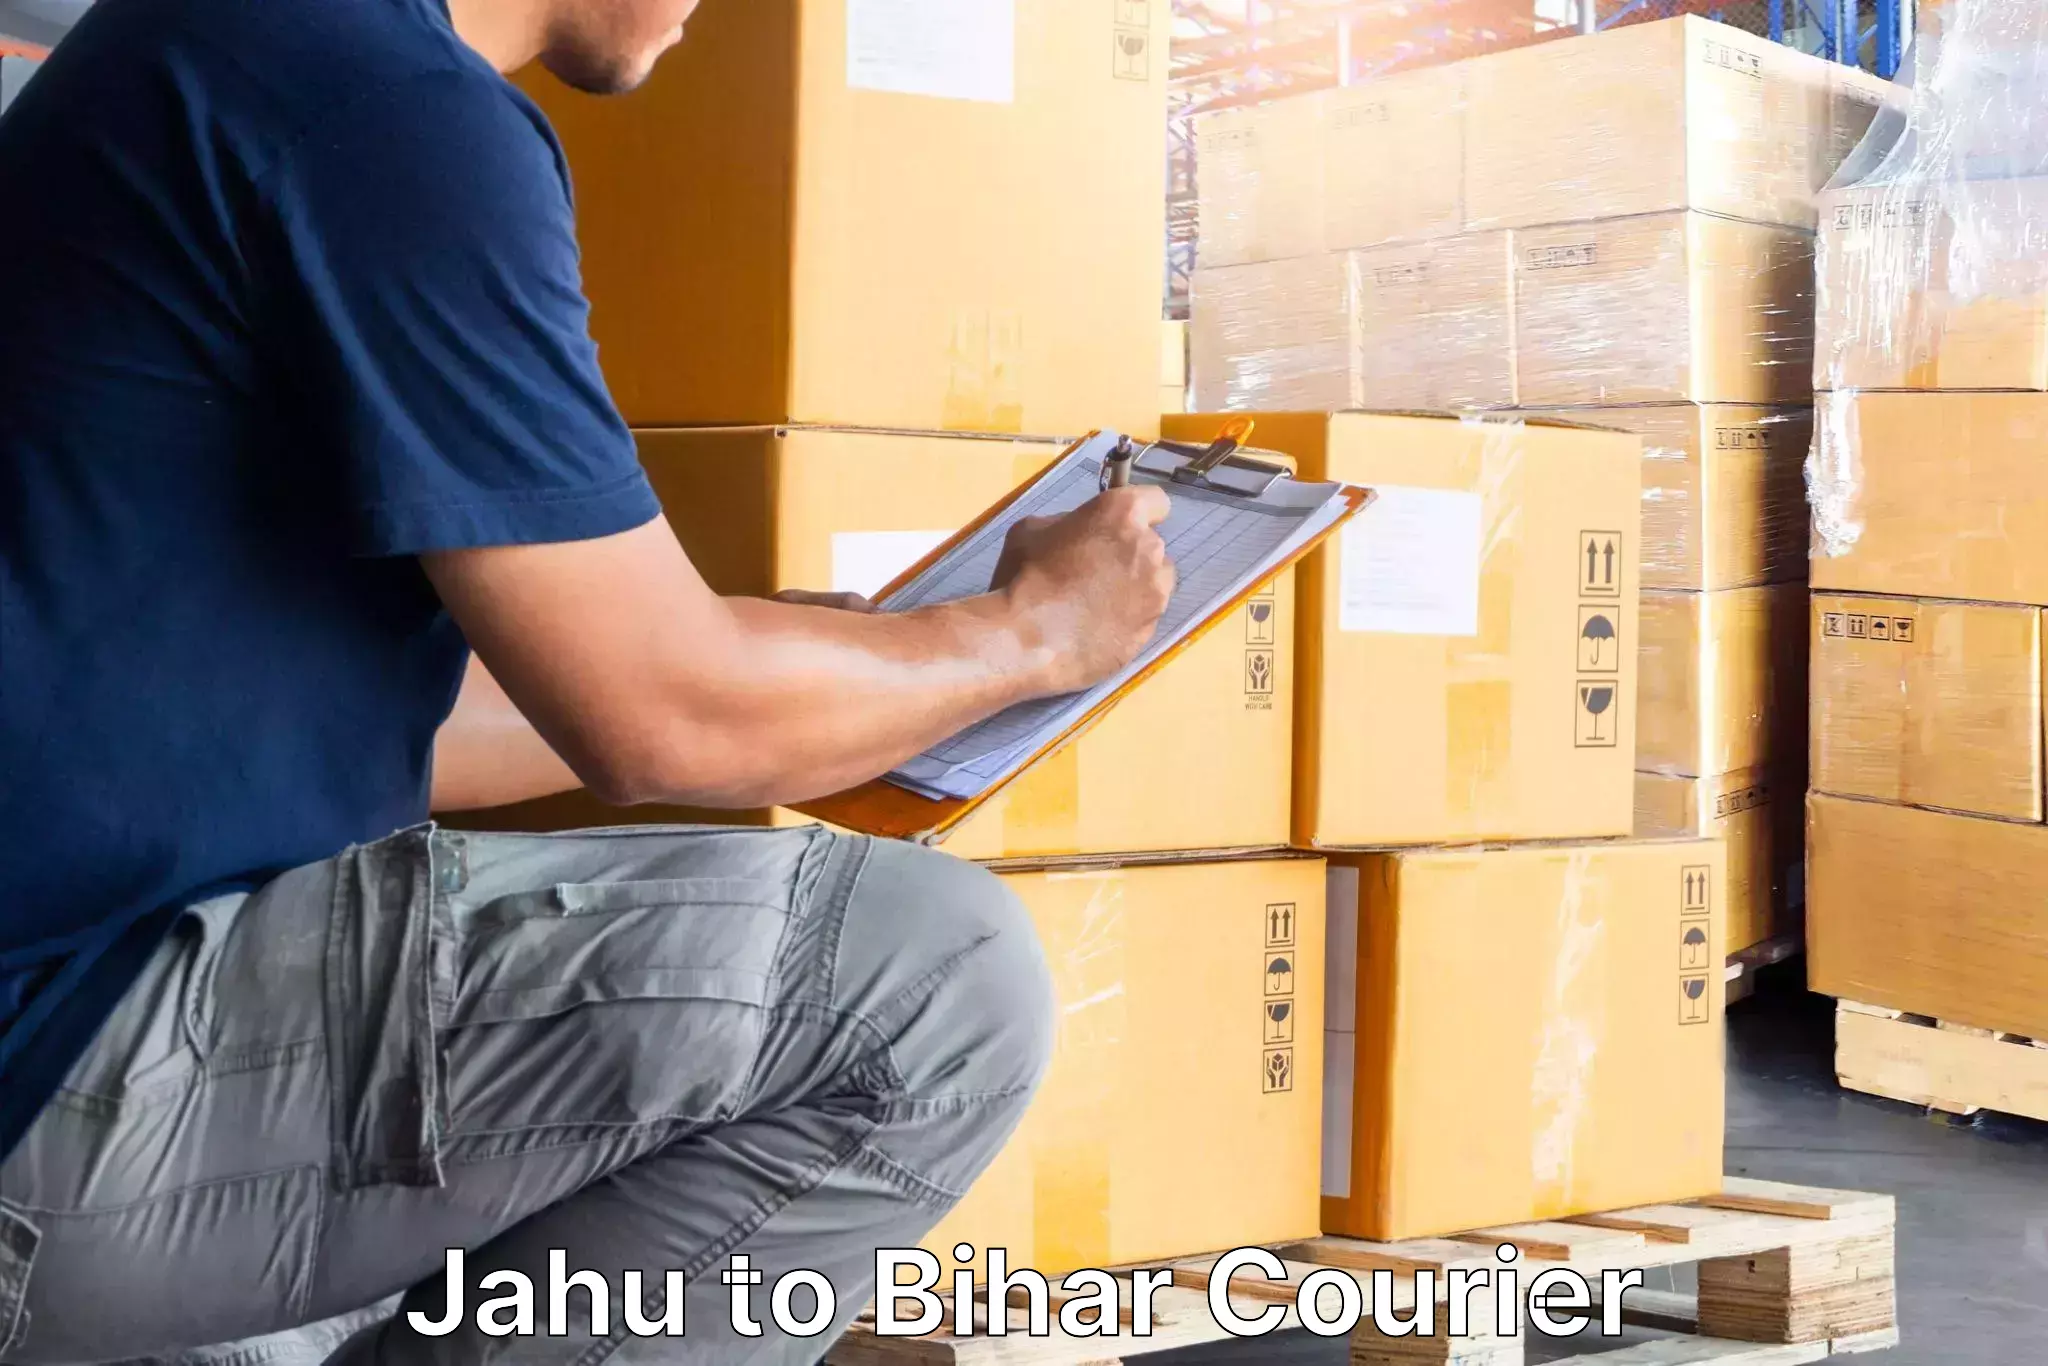 Residential moving experts Jahu to Mairwa